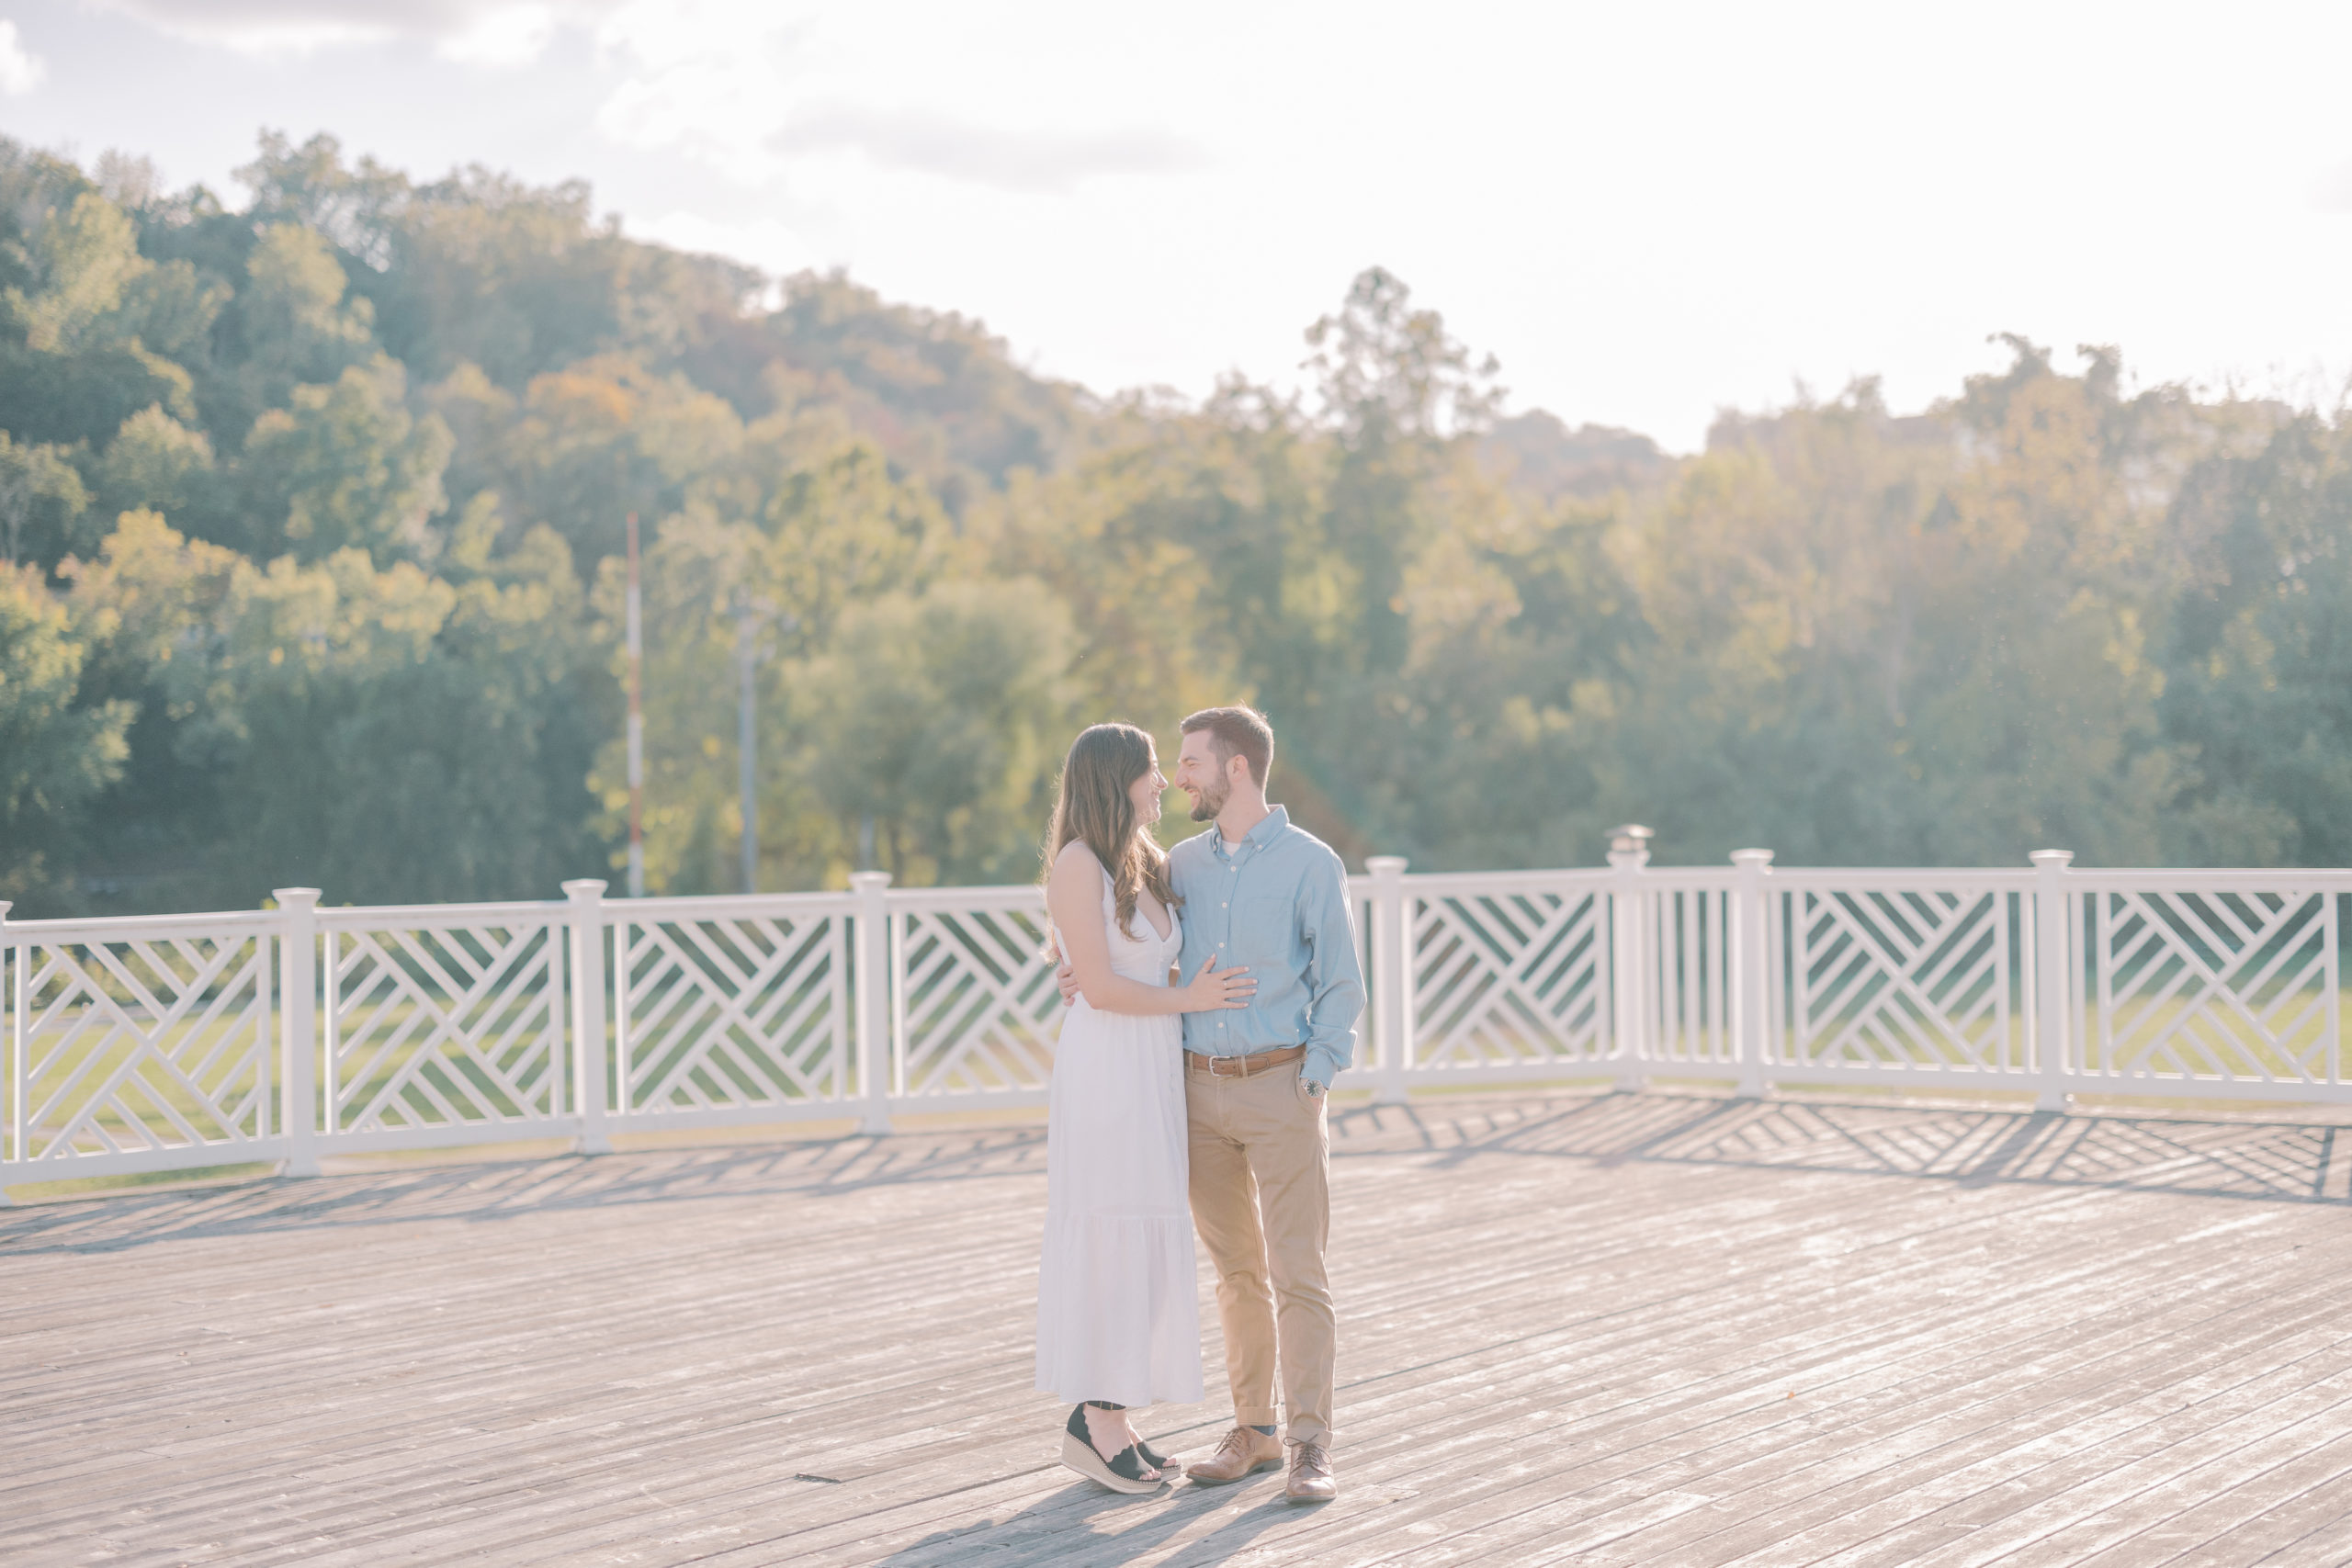 How to Get The Most Out Of Your Engagement Photos